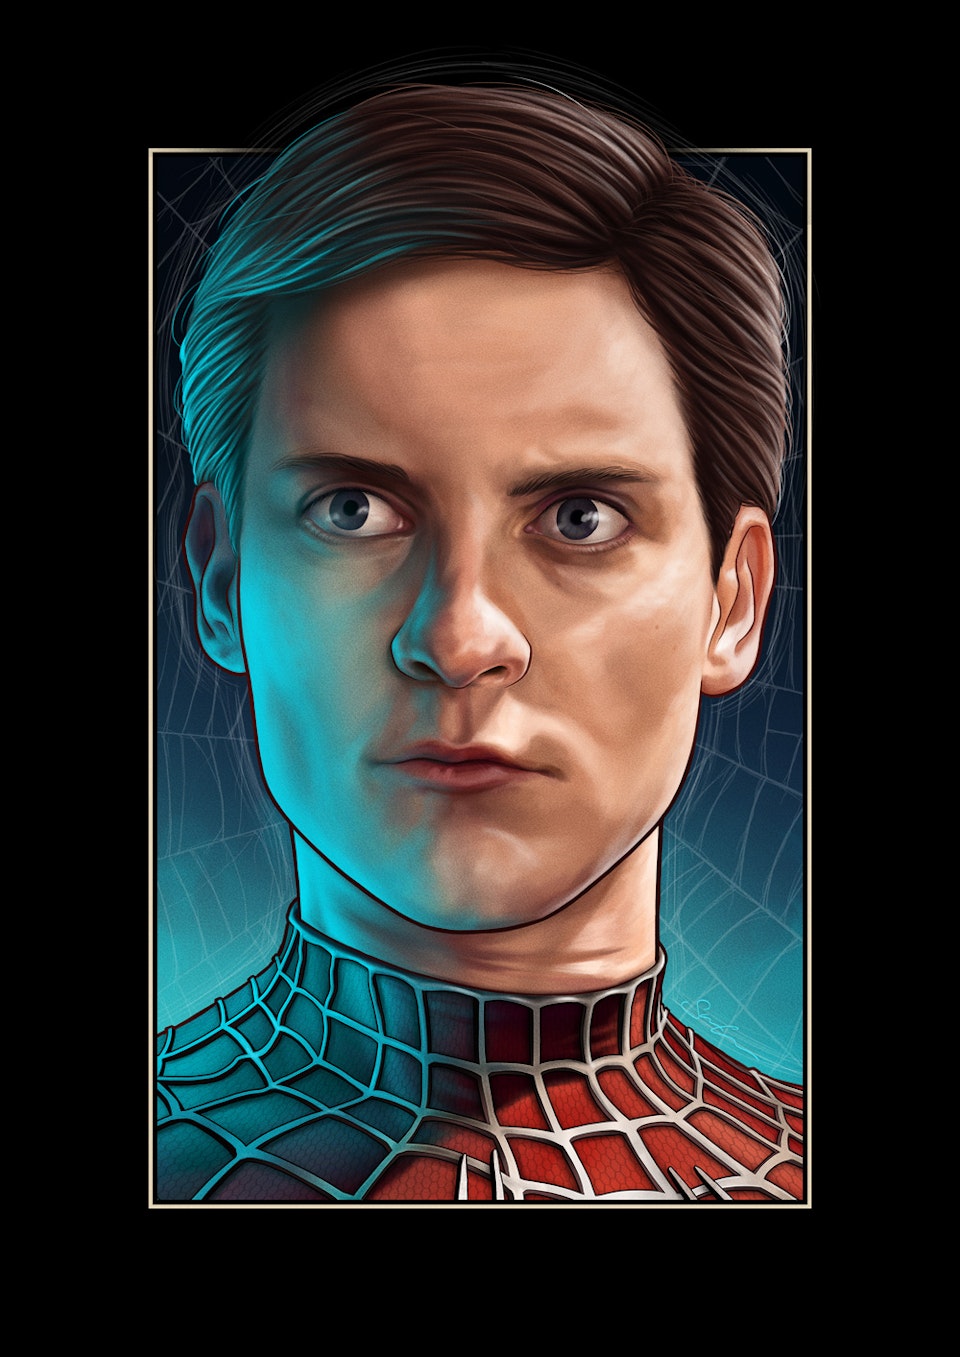 Spider-Man - Character Portraits - Spider-Man/Peter Parker - Tobey Maguire